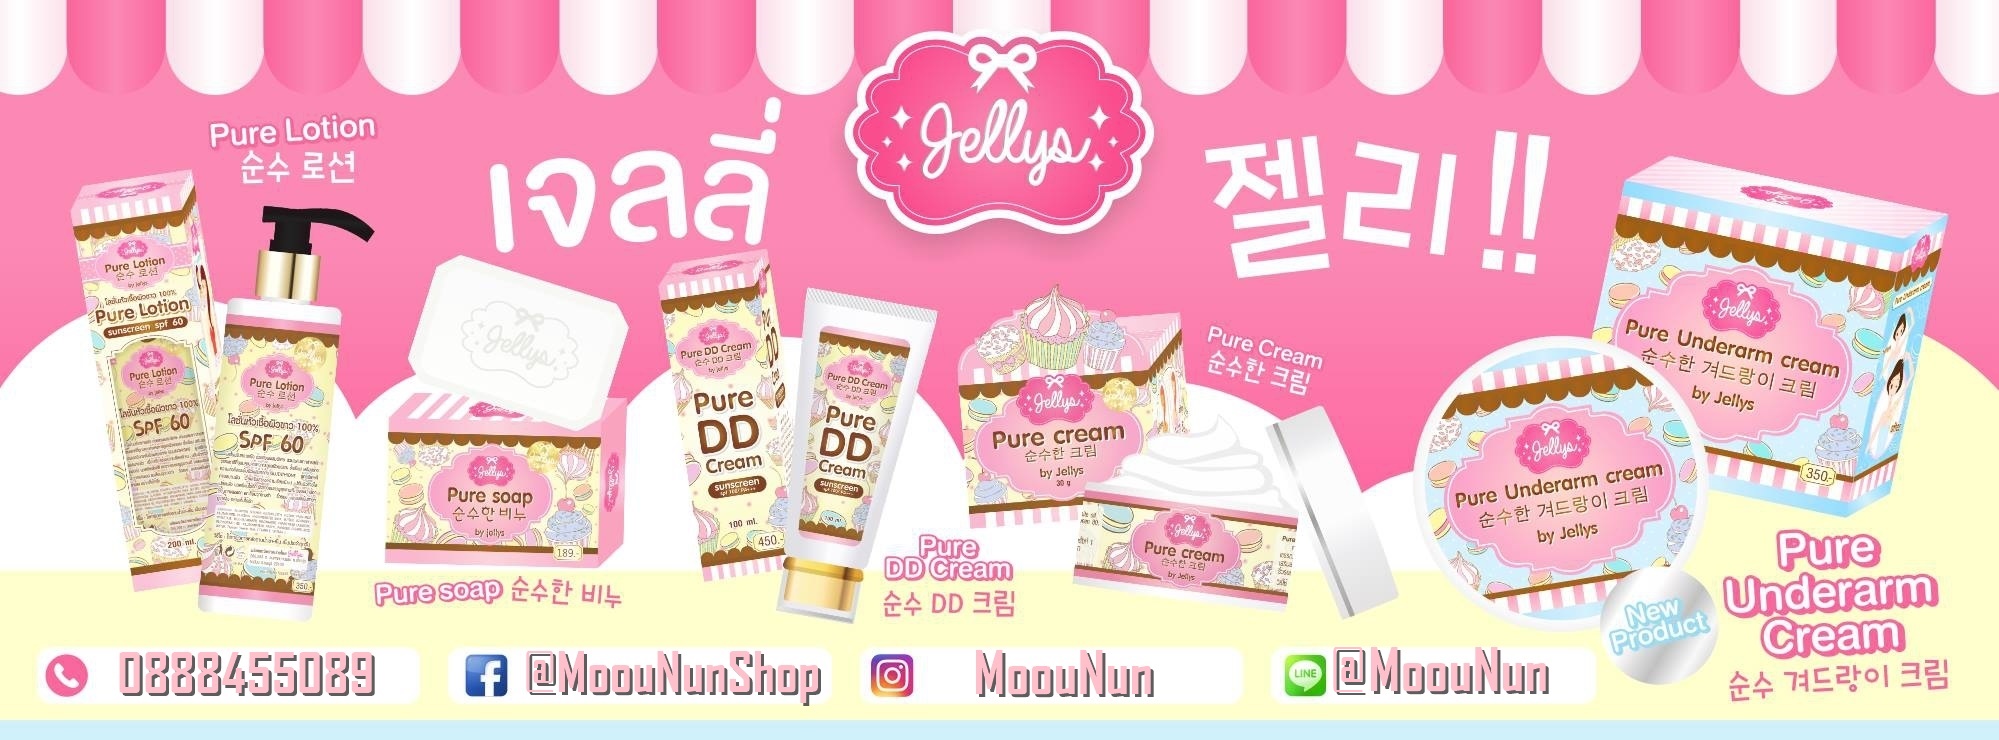 MoouNun Products by jellys